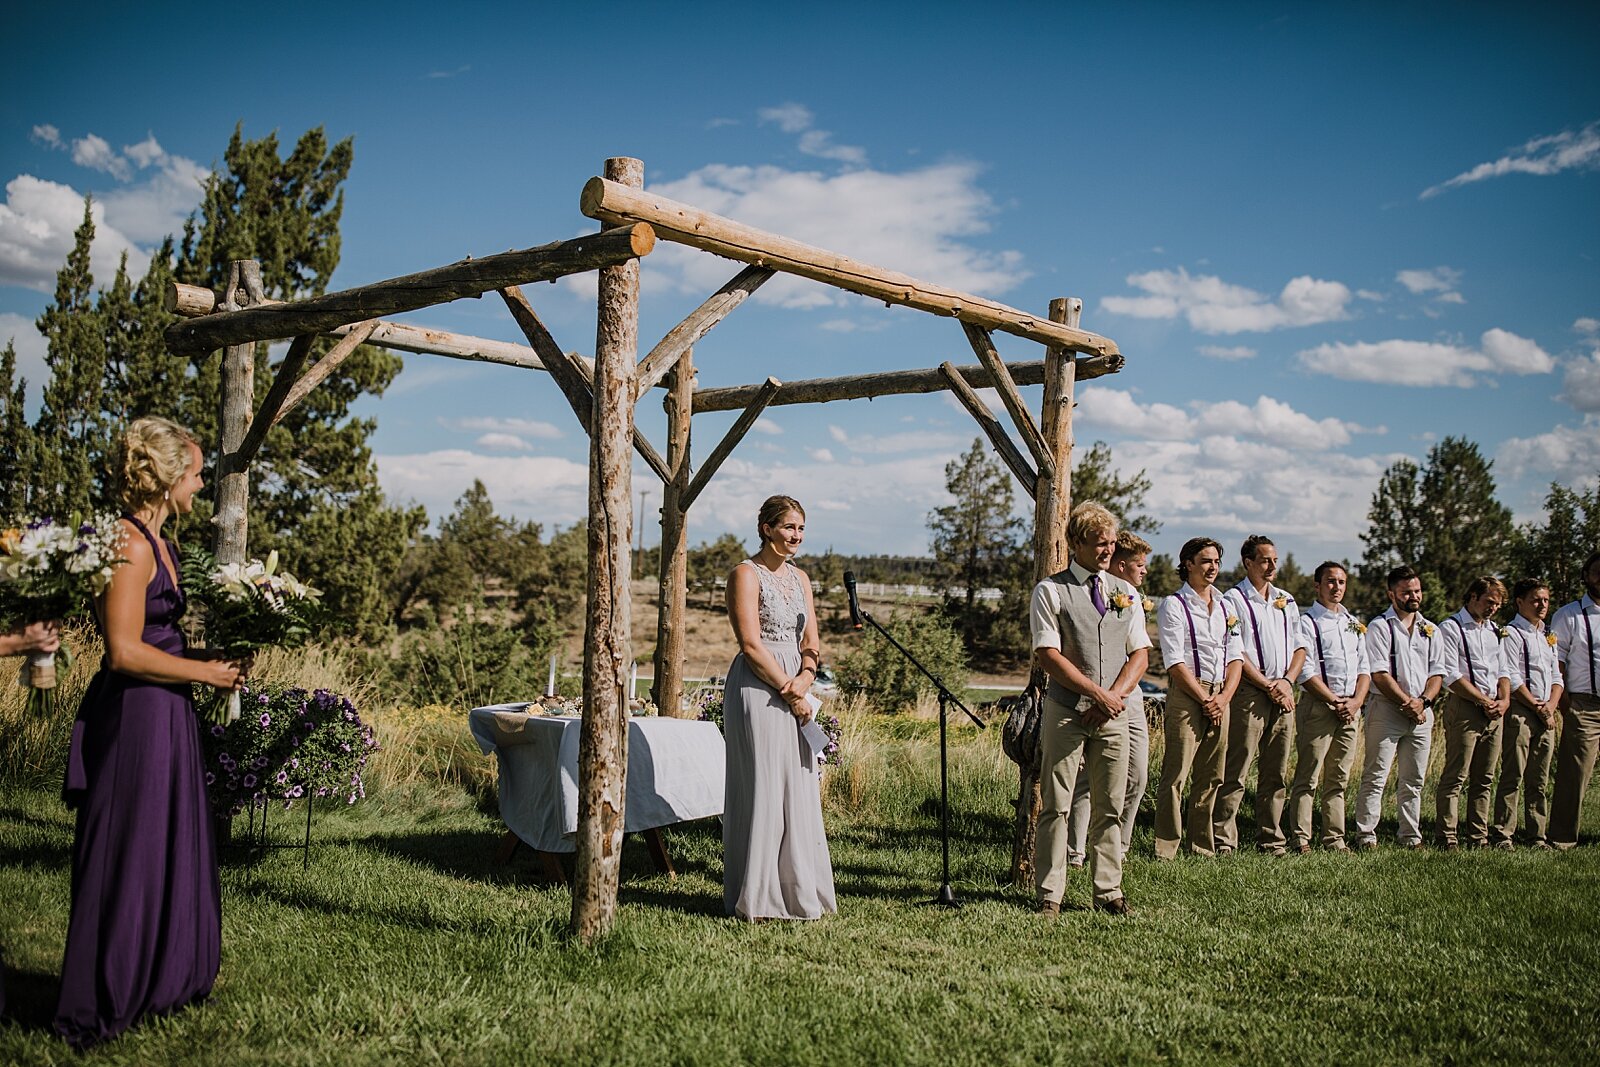 groom and officiant, backyard wedding ceremony, mt hood elopement, mt hood national forest, smith rock state park wedding, smith rock state park hiking elopement, terrebonne oregon backyard wedding